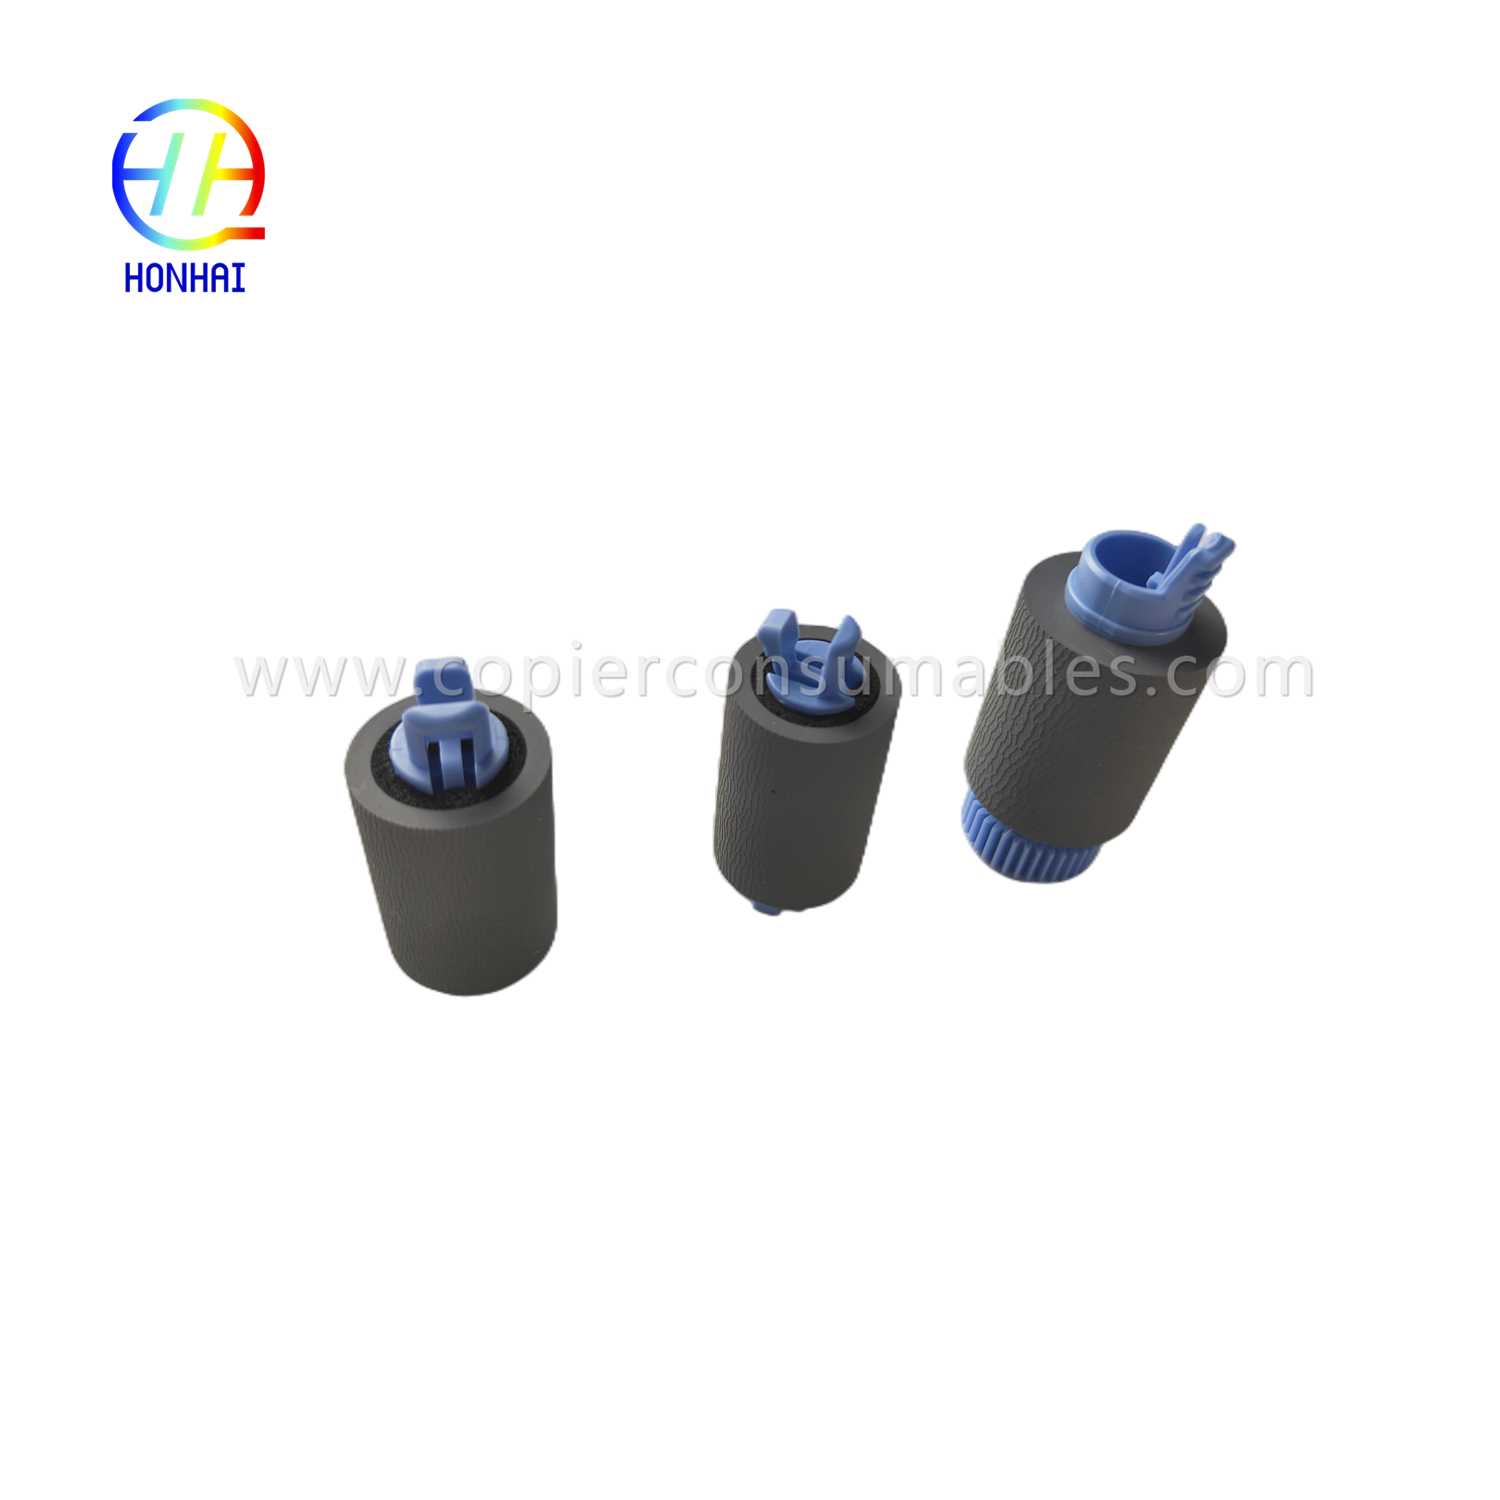 https://www.copierconsumables.com/tray-2-5-pickup-feed-separation-roller-set-for-hp-a7w93-67082-mfp-785f-780dn-e77650z-e77660z-e77650dn-e77650dn-e77670dn-e77670dn p77750z-p77760z-p75050dn-p75050dw-product/